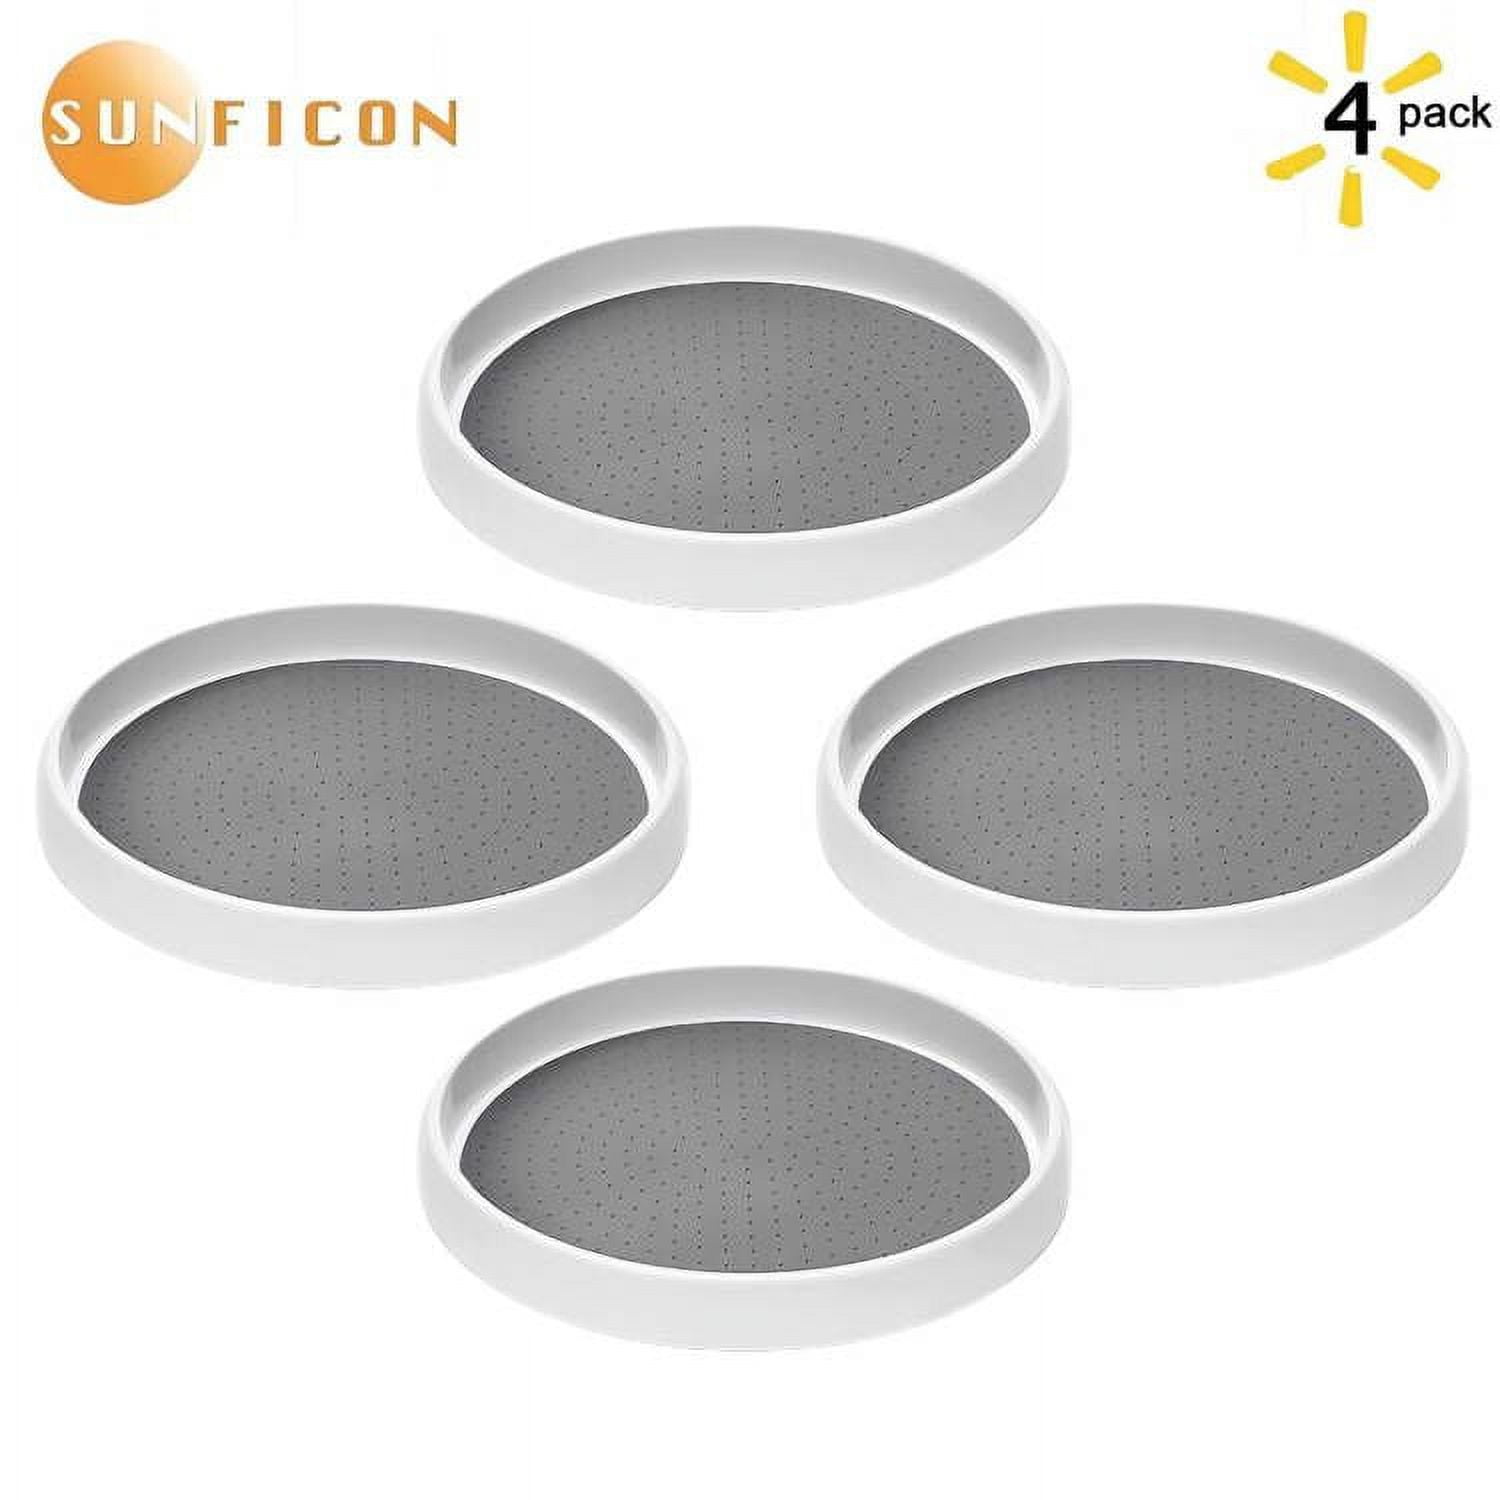 Sunficon 3 Pack Lazy Susans Turntable